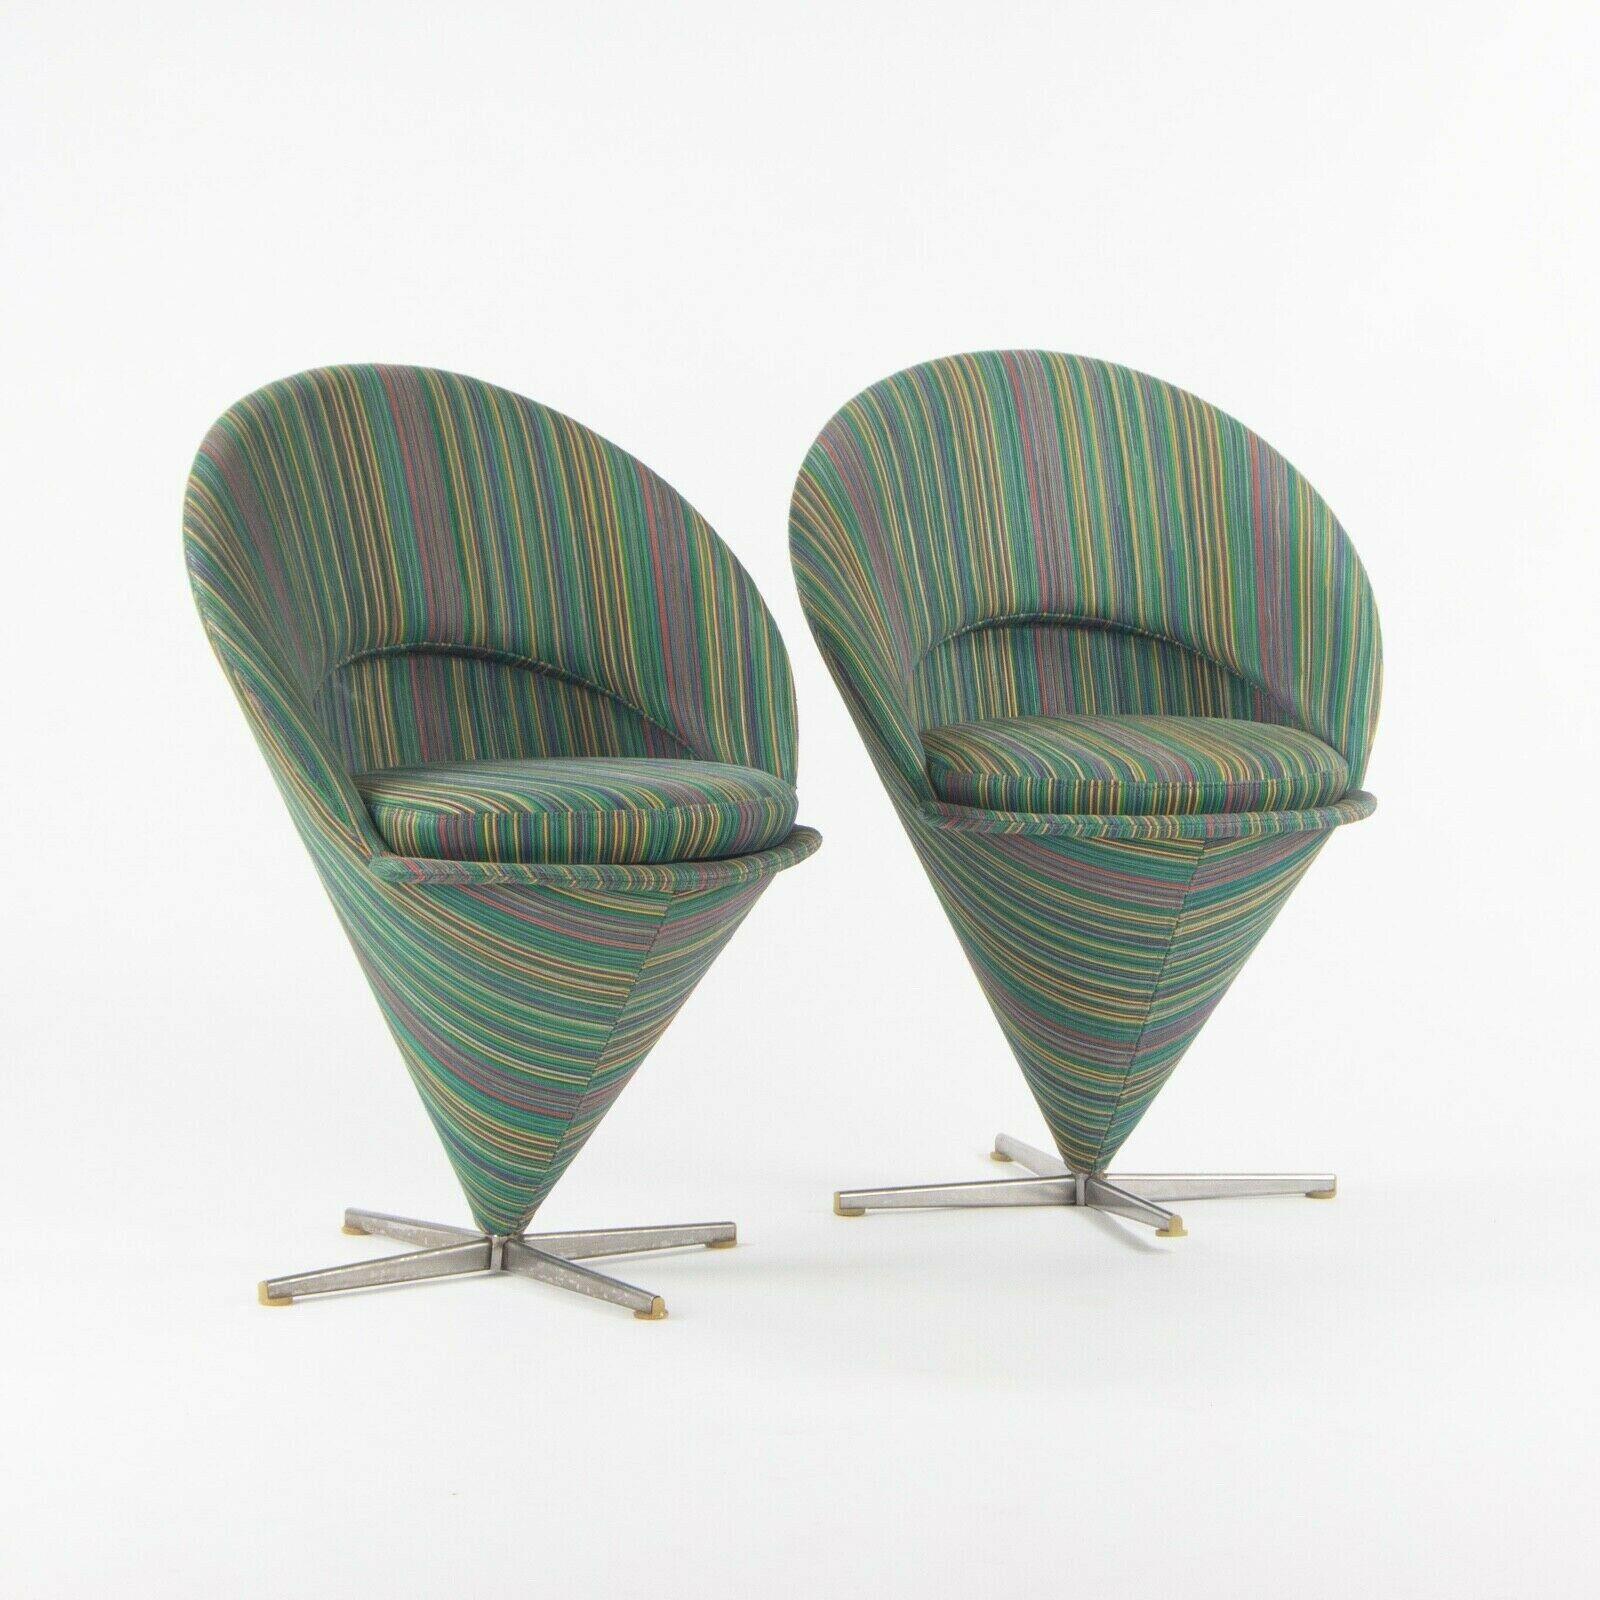 Listed for sale is an original pair of cone chairs, designed by Verner Panton and produced by Plus-Linje. Whereas the current variations and now produced by Vitra, this early example was produced by the lesser known Plus-Linje company. The cone